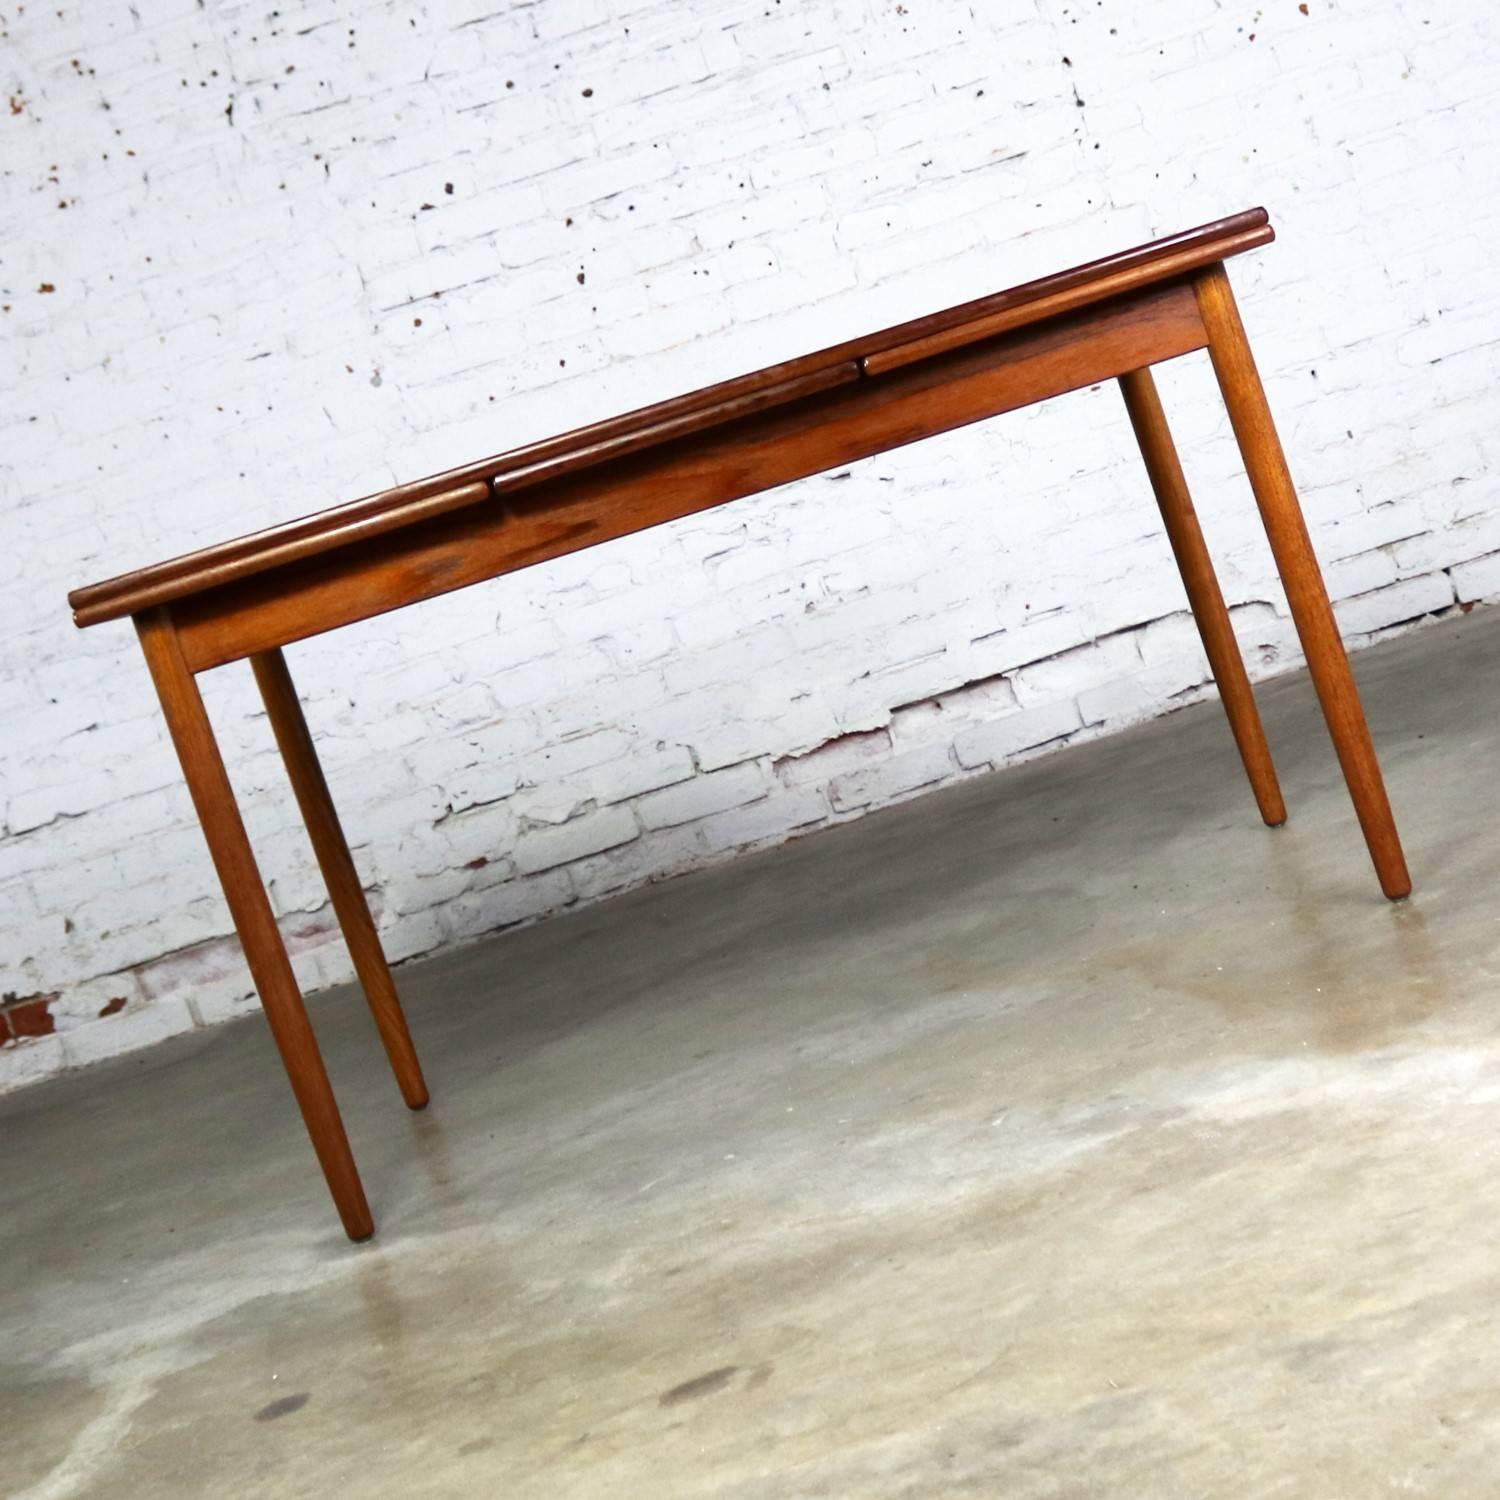 Handsome midcentury Scandinavian modern rectangular extending dining table of gorgeous and warm teak with draw leaf extensions. It is marked made in Denmark and is in overall fabulous condition. It is sturdy, and its finish has been restored to its